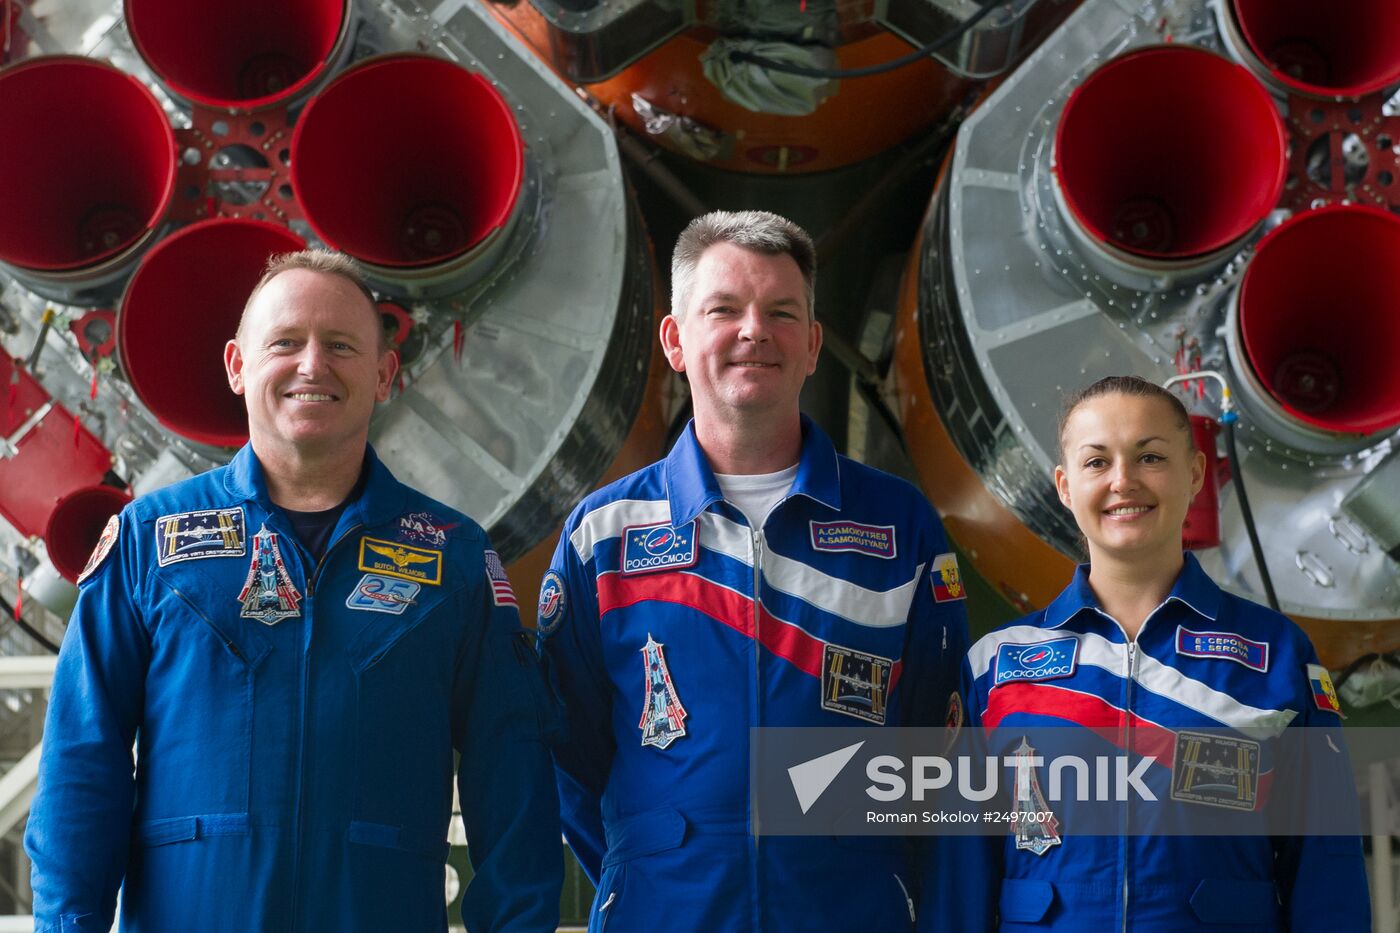 Soyuz TMA-14M crew perform final inspection of spacecraft and carrier rocket